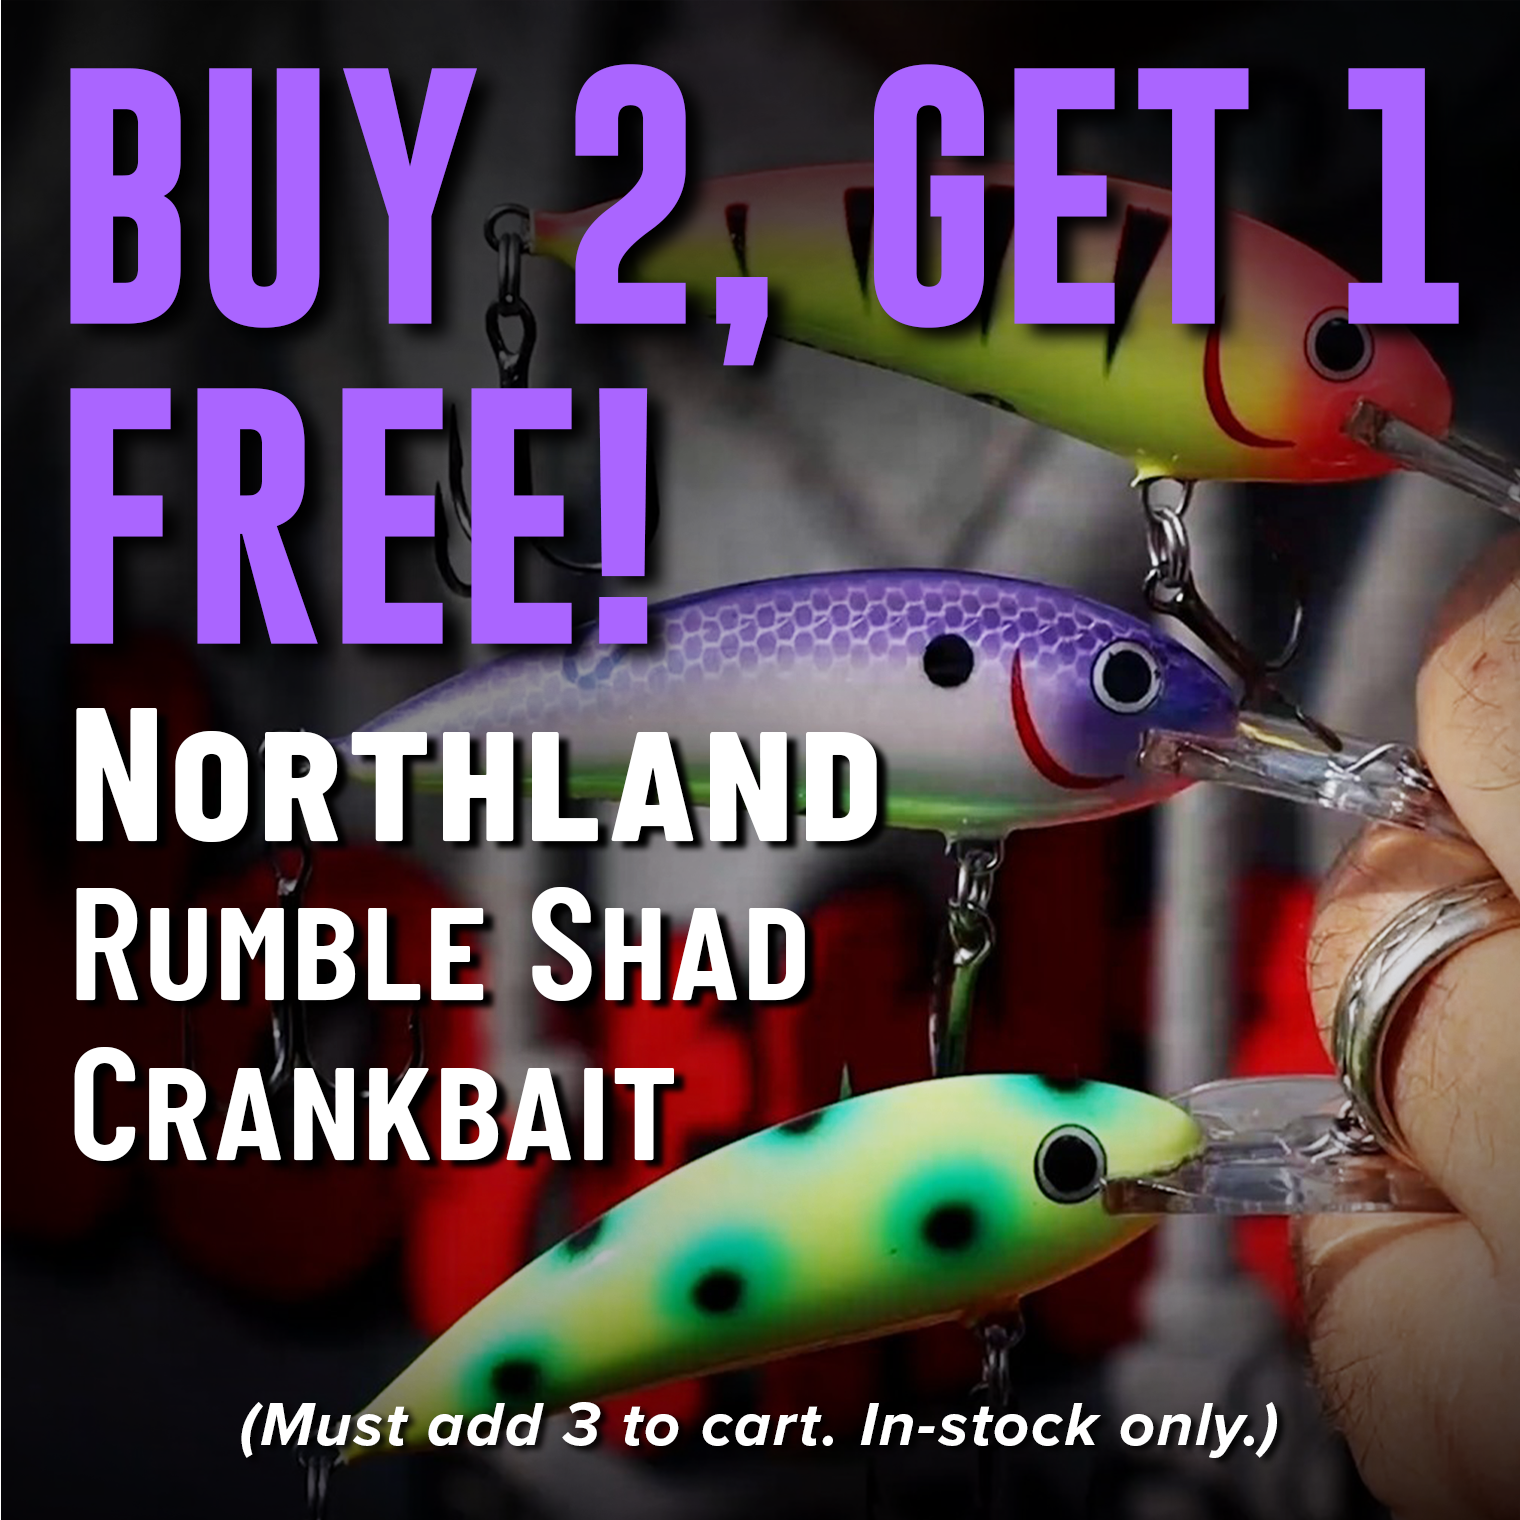 Buy 2, Get 1 Free! Northland Rumble Shad Crankbait (Must add 3 to cart. In-stock only.)